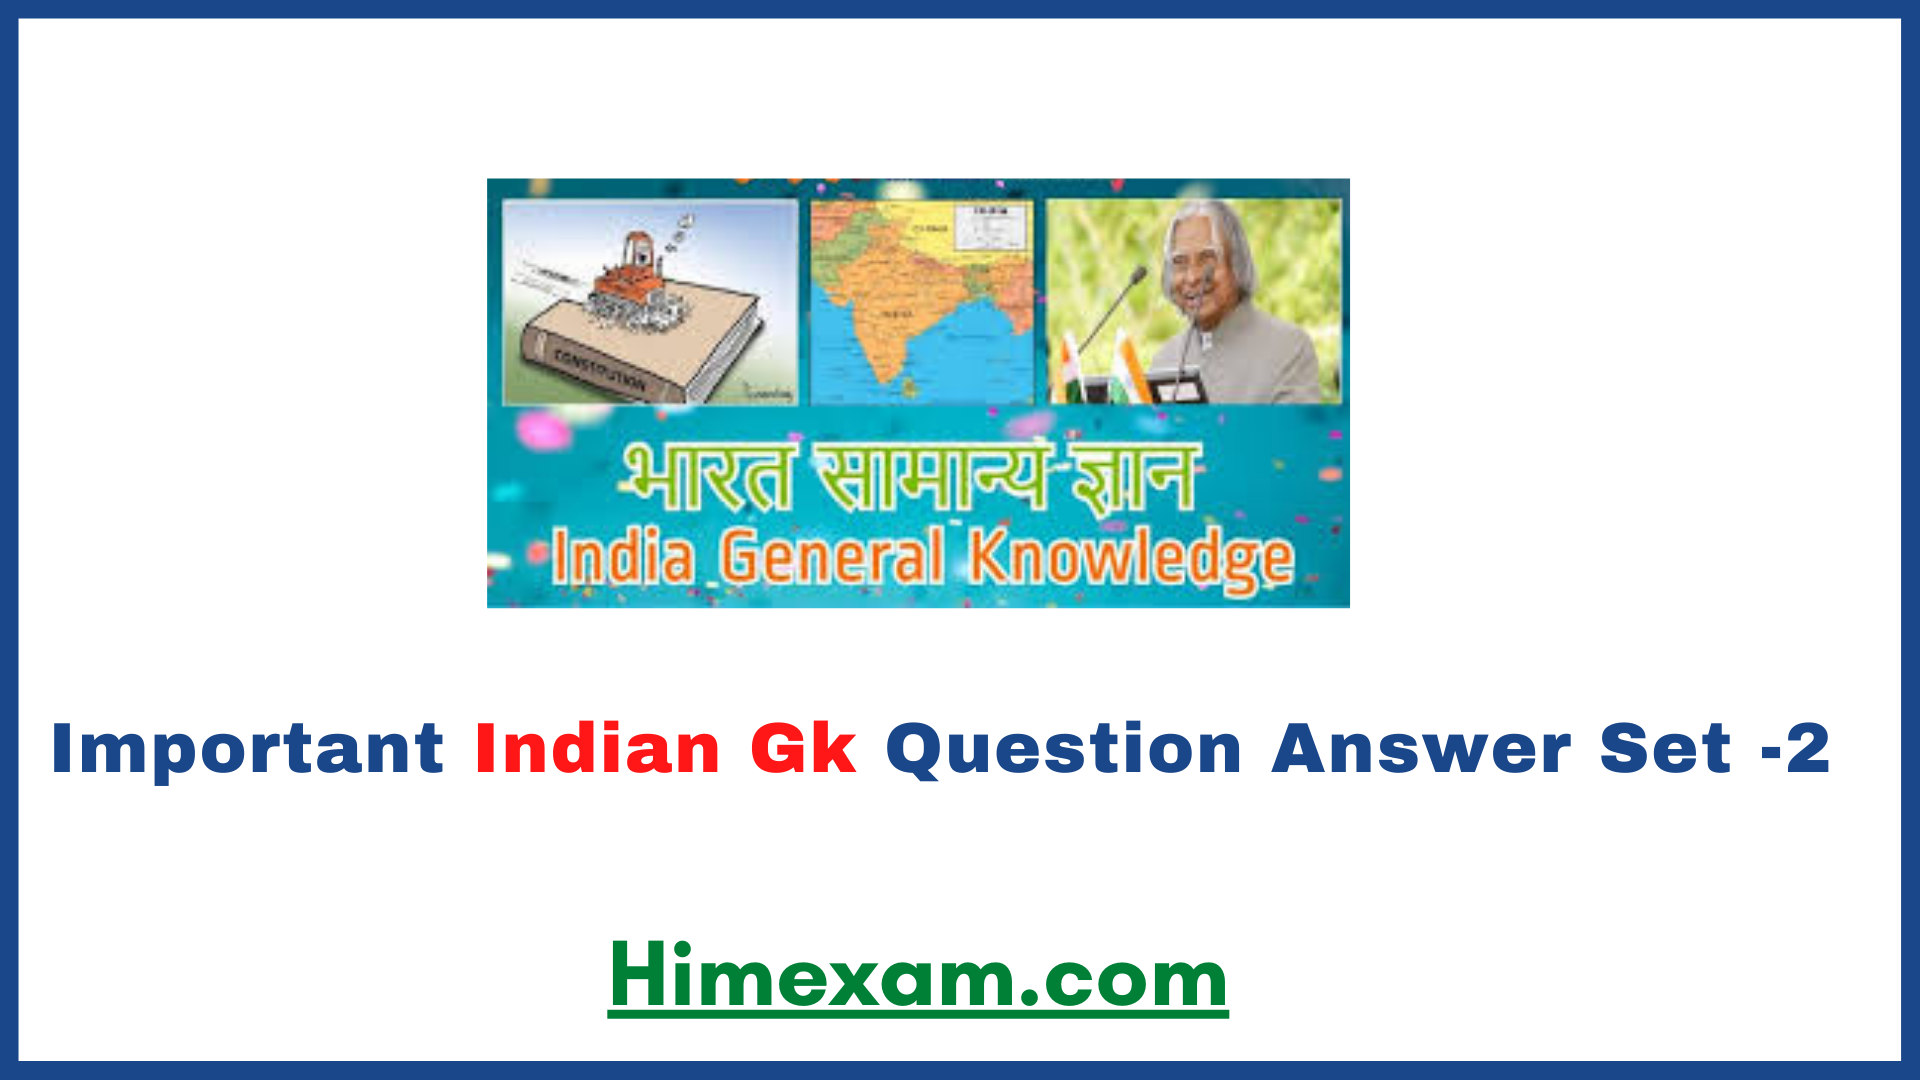 Important Indian Gk Question Answer Set -2